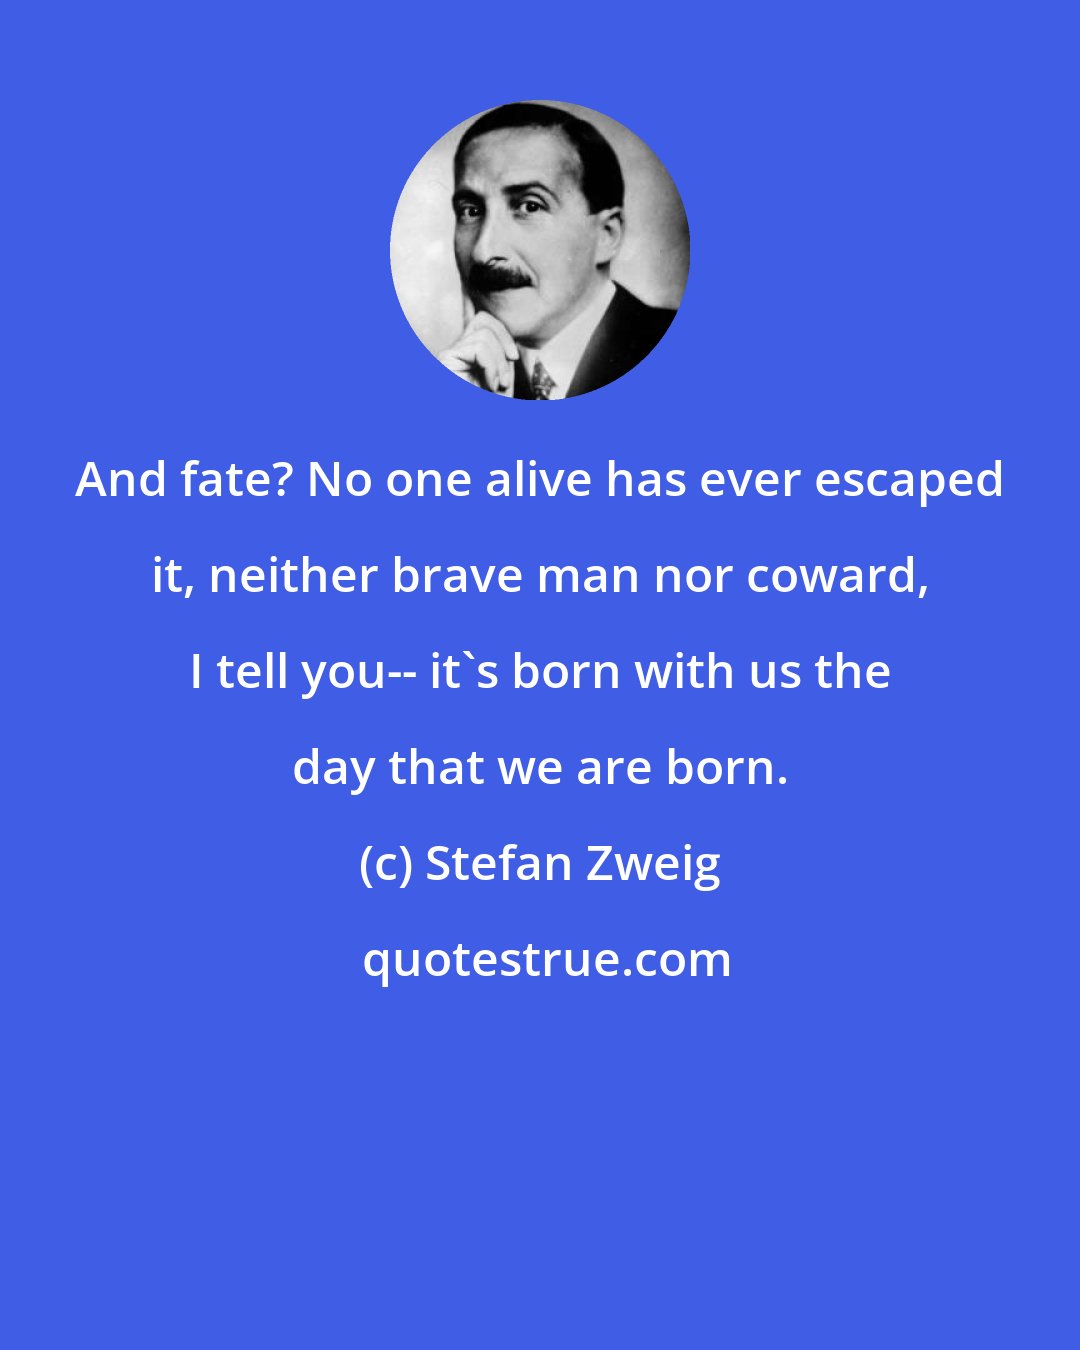 Stefan Zweig: And fate? No one alive has ever escaped it, neither brave man nor coward, I tell you-- it's born with us the day that we are born.